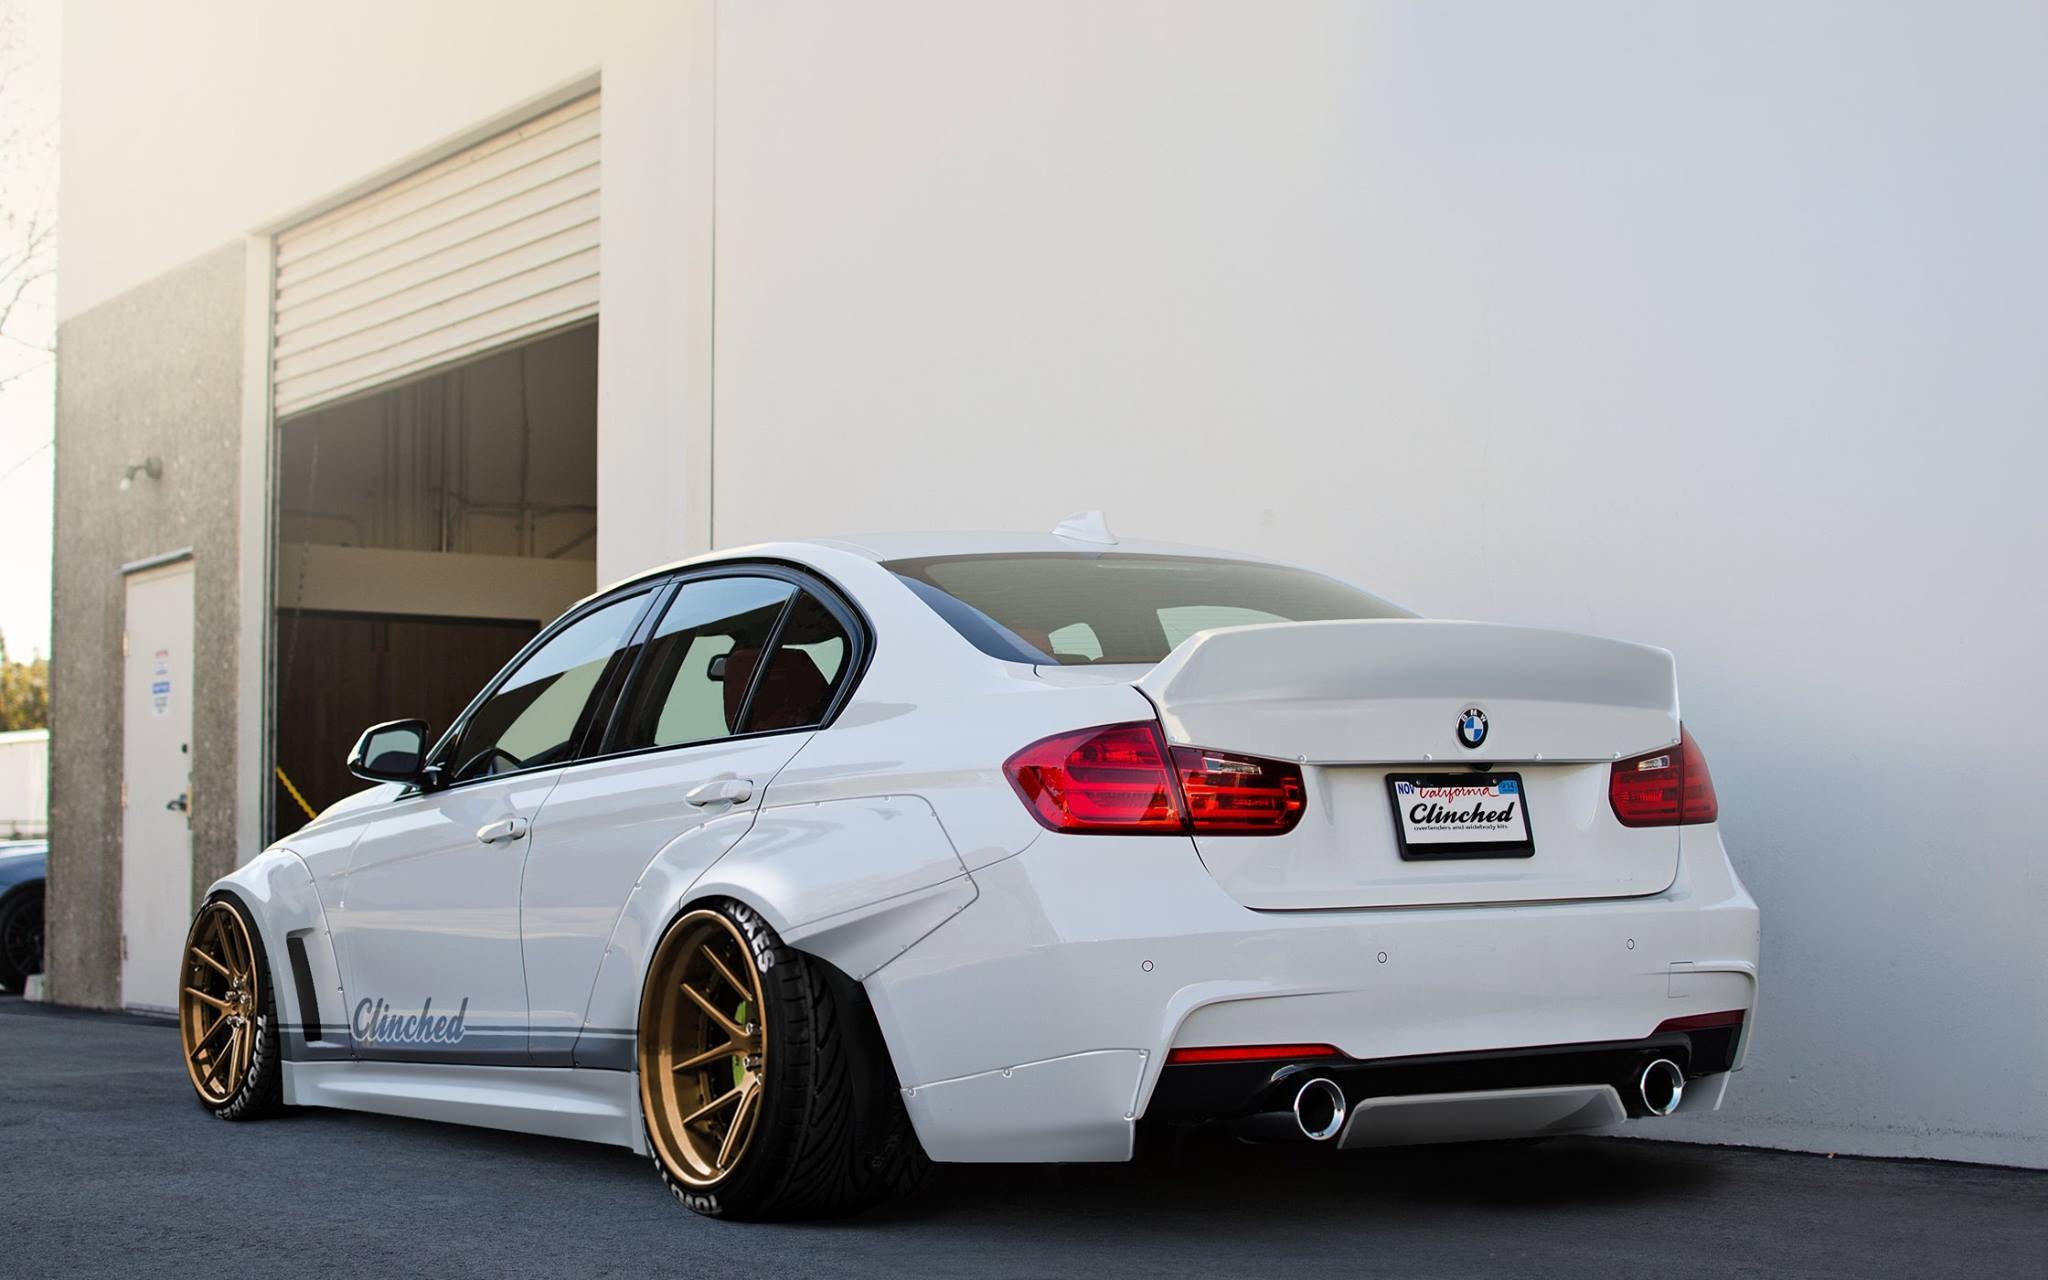 Custom Style Rear Spoiler on White BMW 3-Series - Photo by Clinched